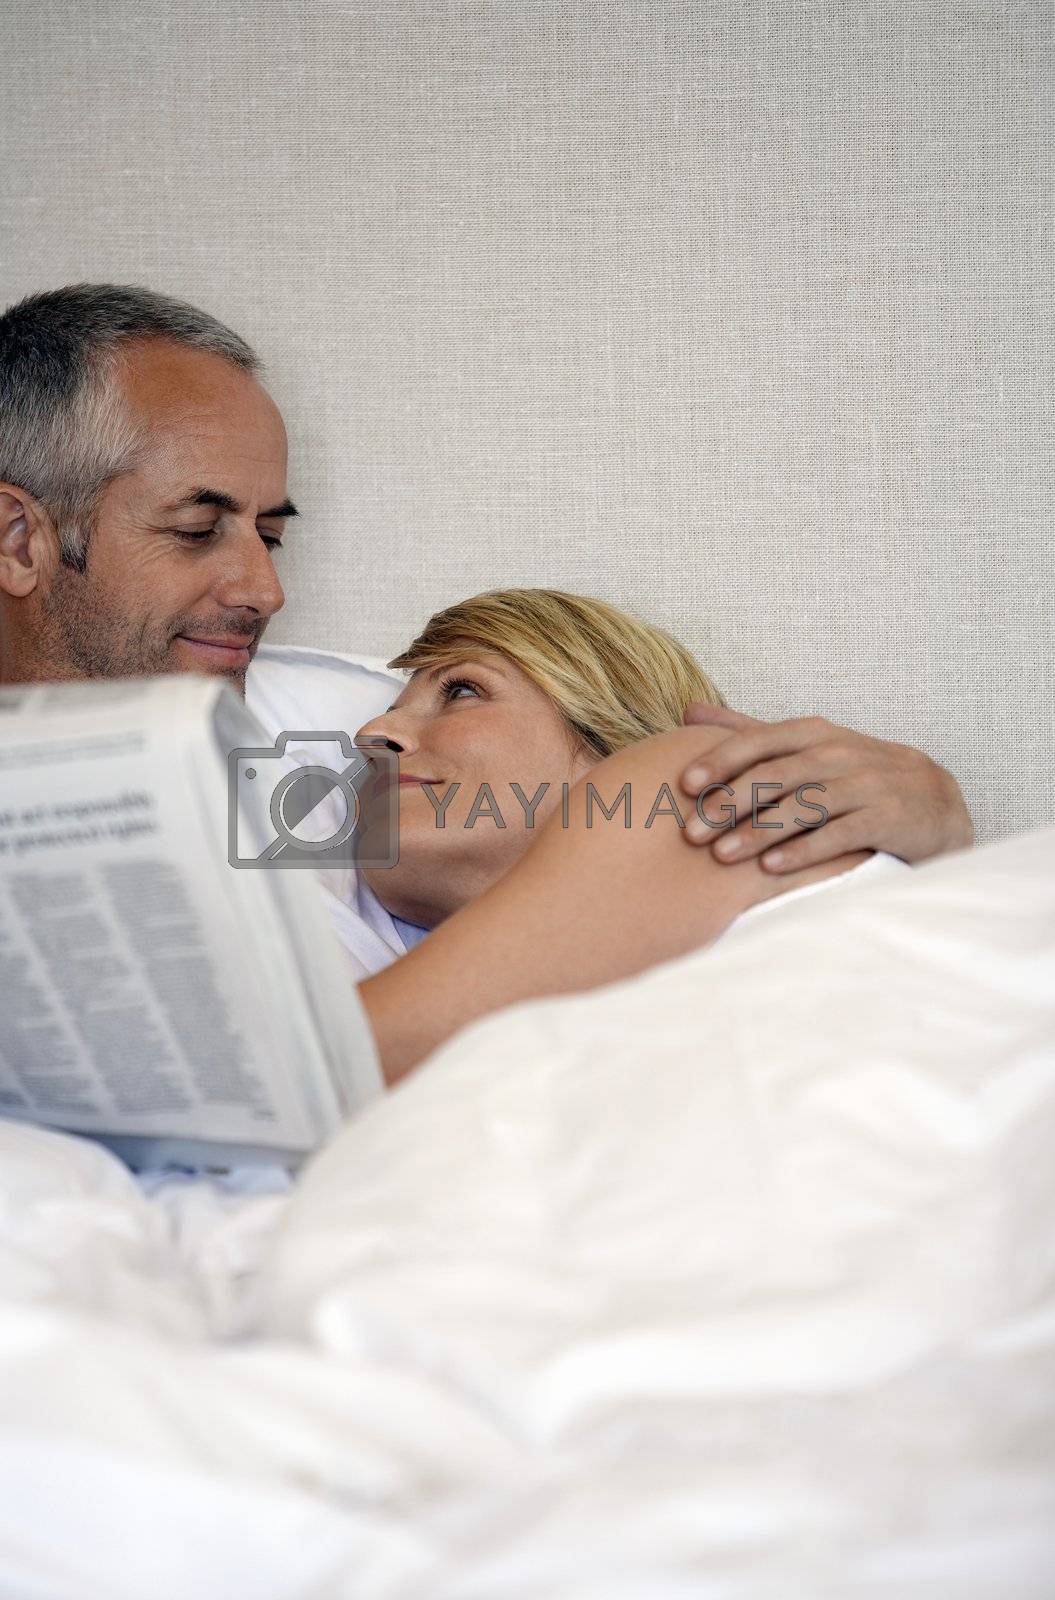 Royalty free image of Couple in Bed by moodboard